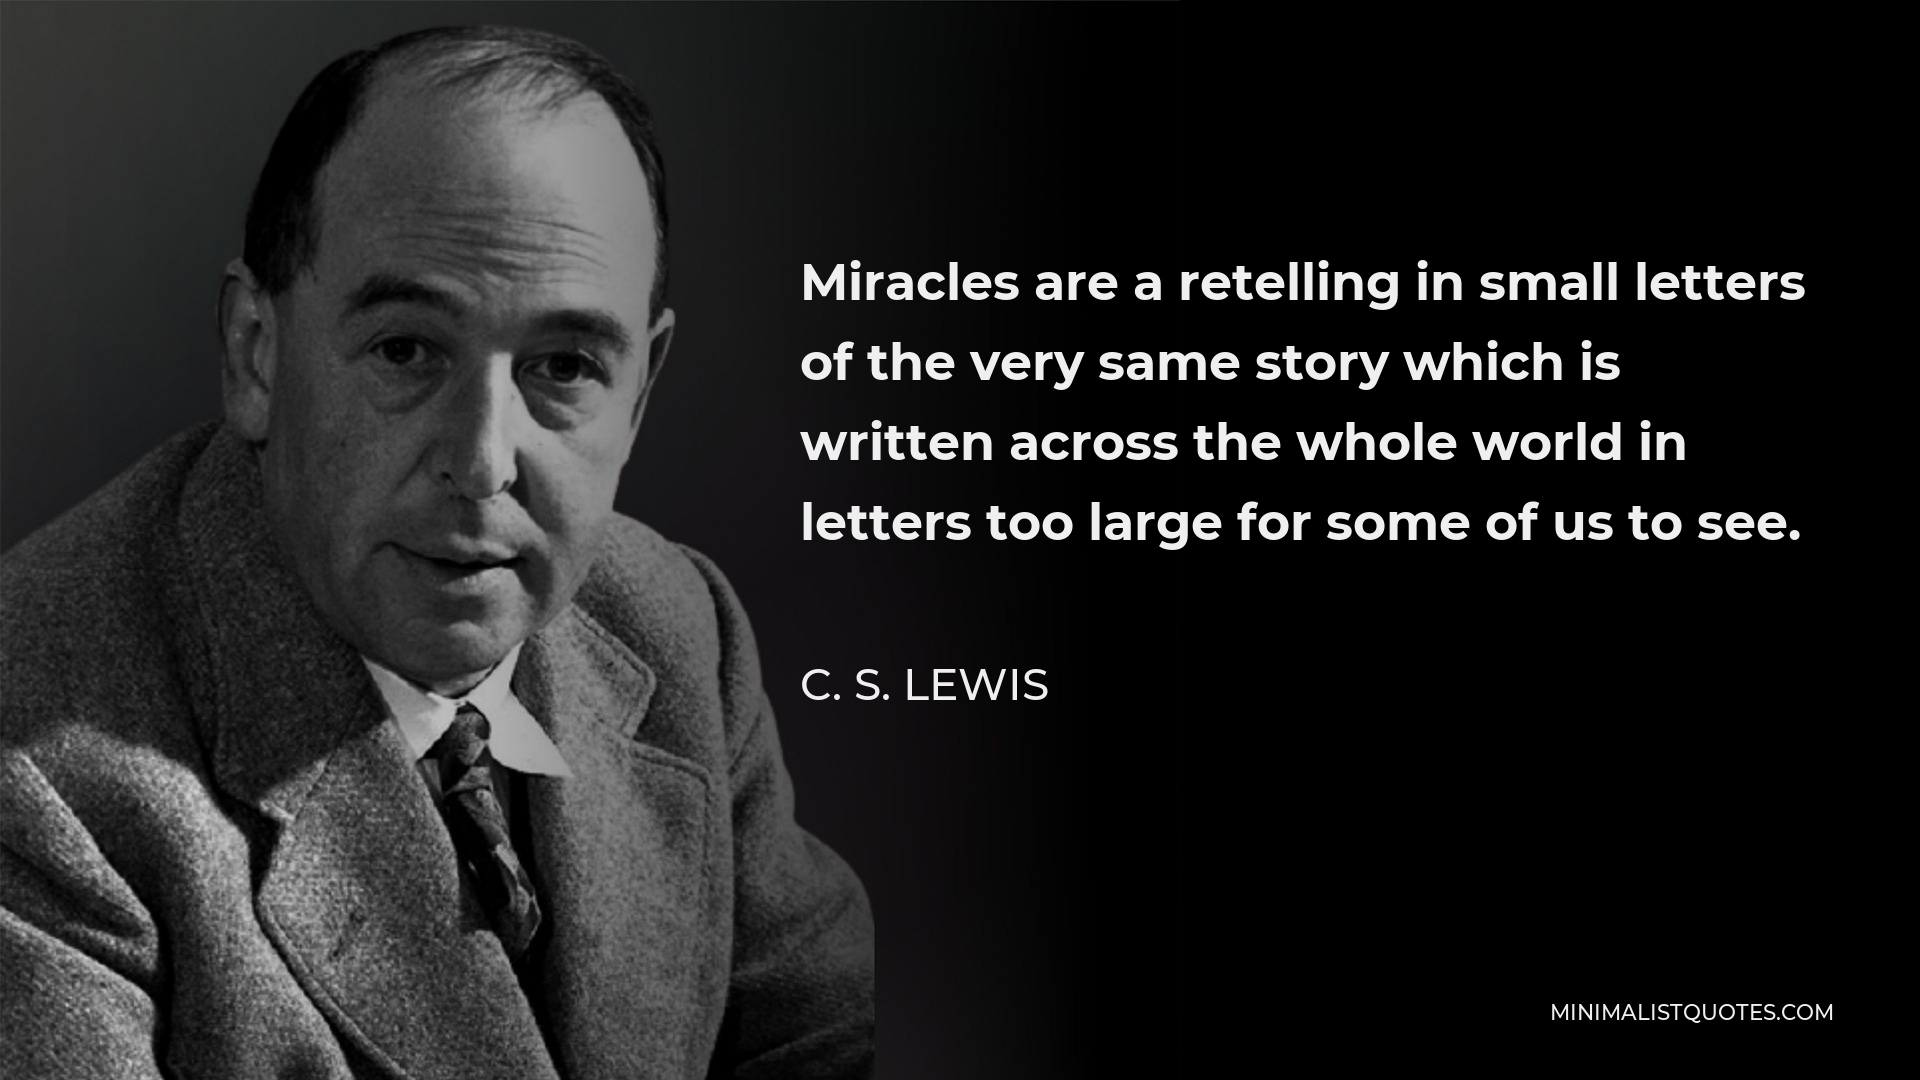 C. S. Lewis Quote - Miracles are a retelling in small letters of the very same story which is written across the whole world in letters too large for some of us to see.